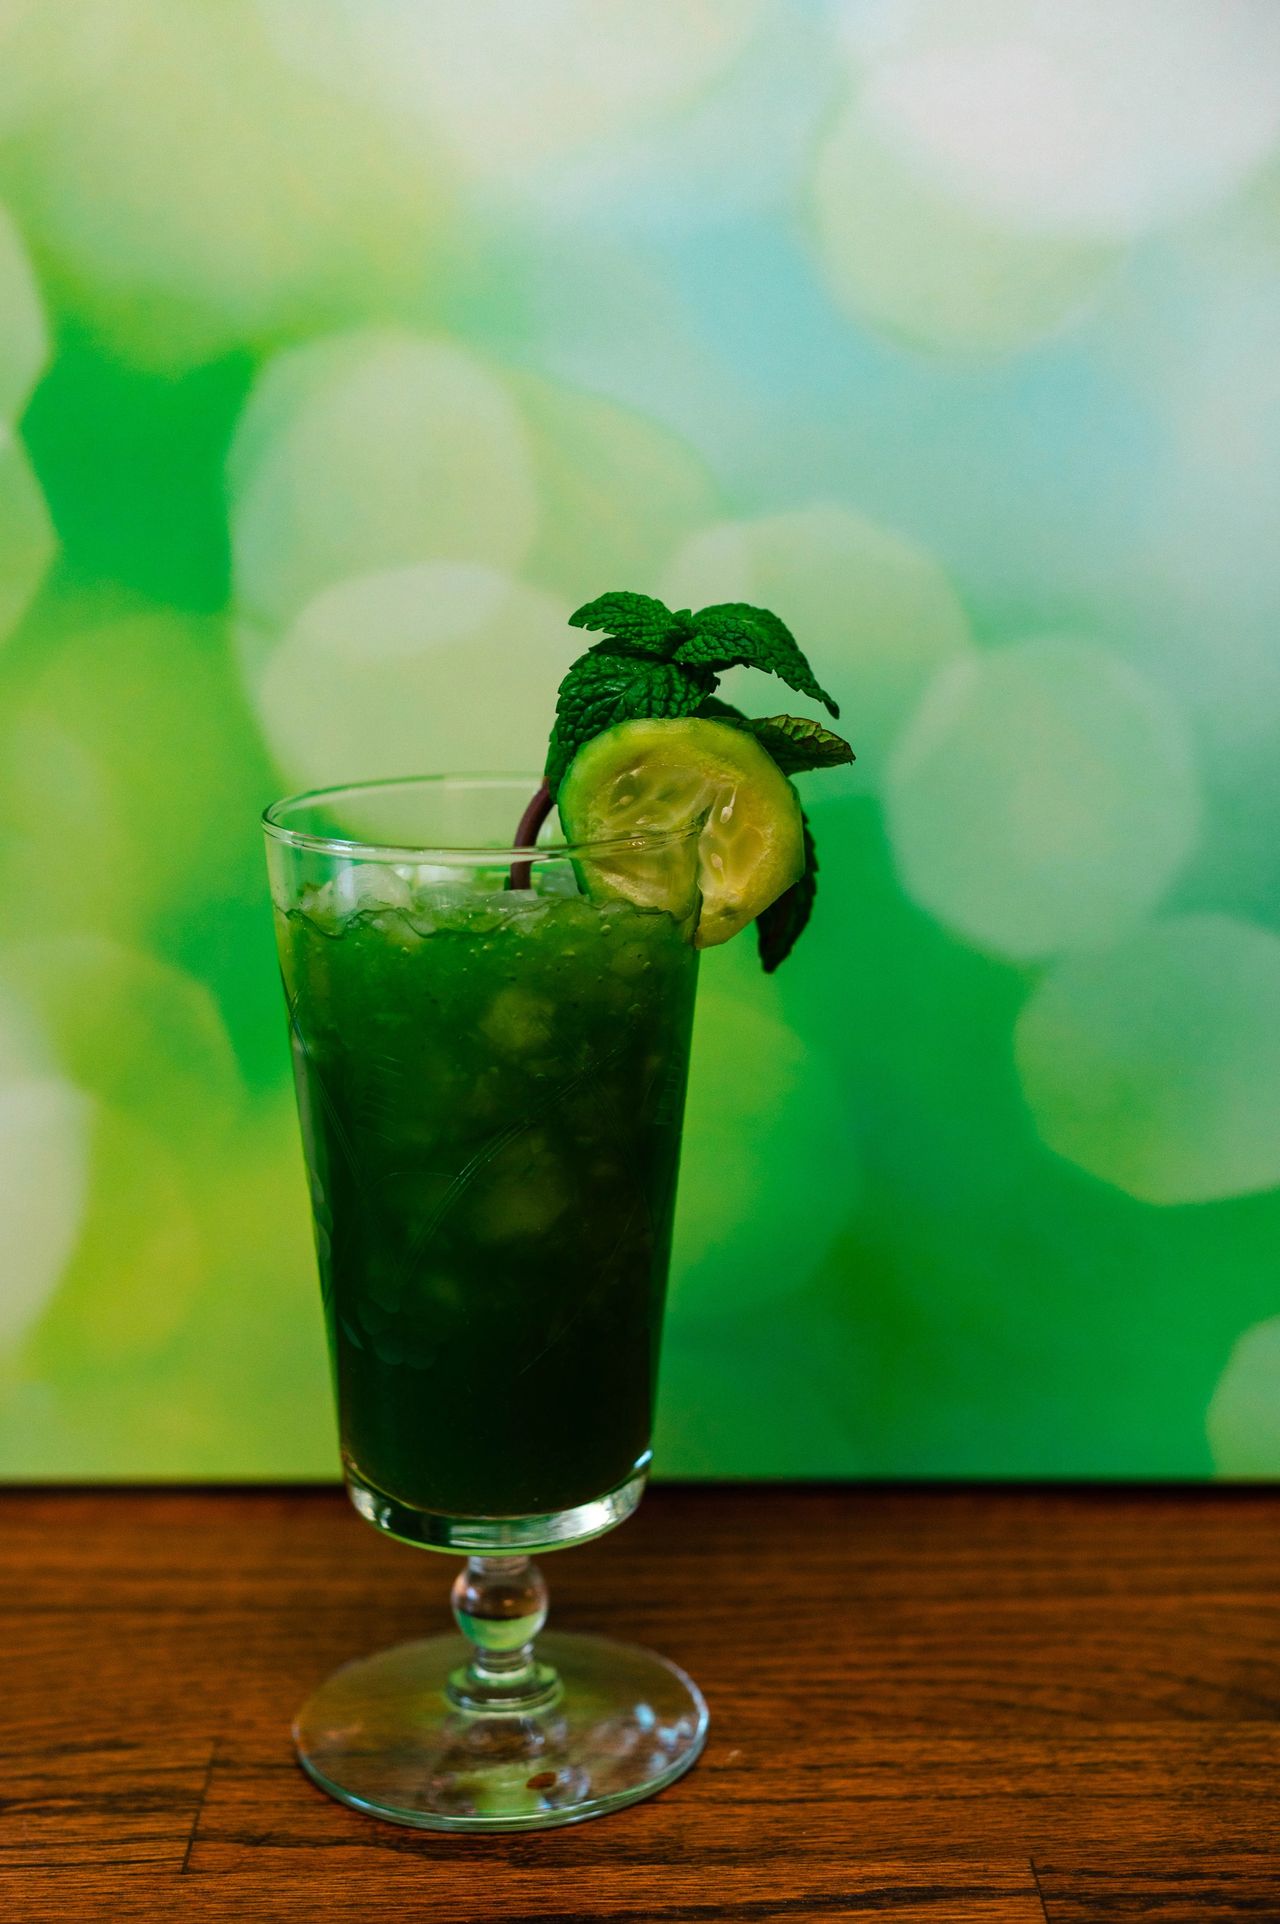 Kale Vodka Tonic made with fresh kale, apple, cucumber, lemon and ginger. Claire Keathley Photography